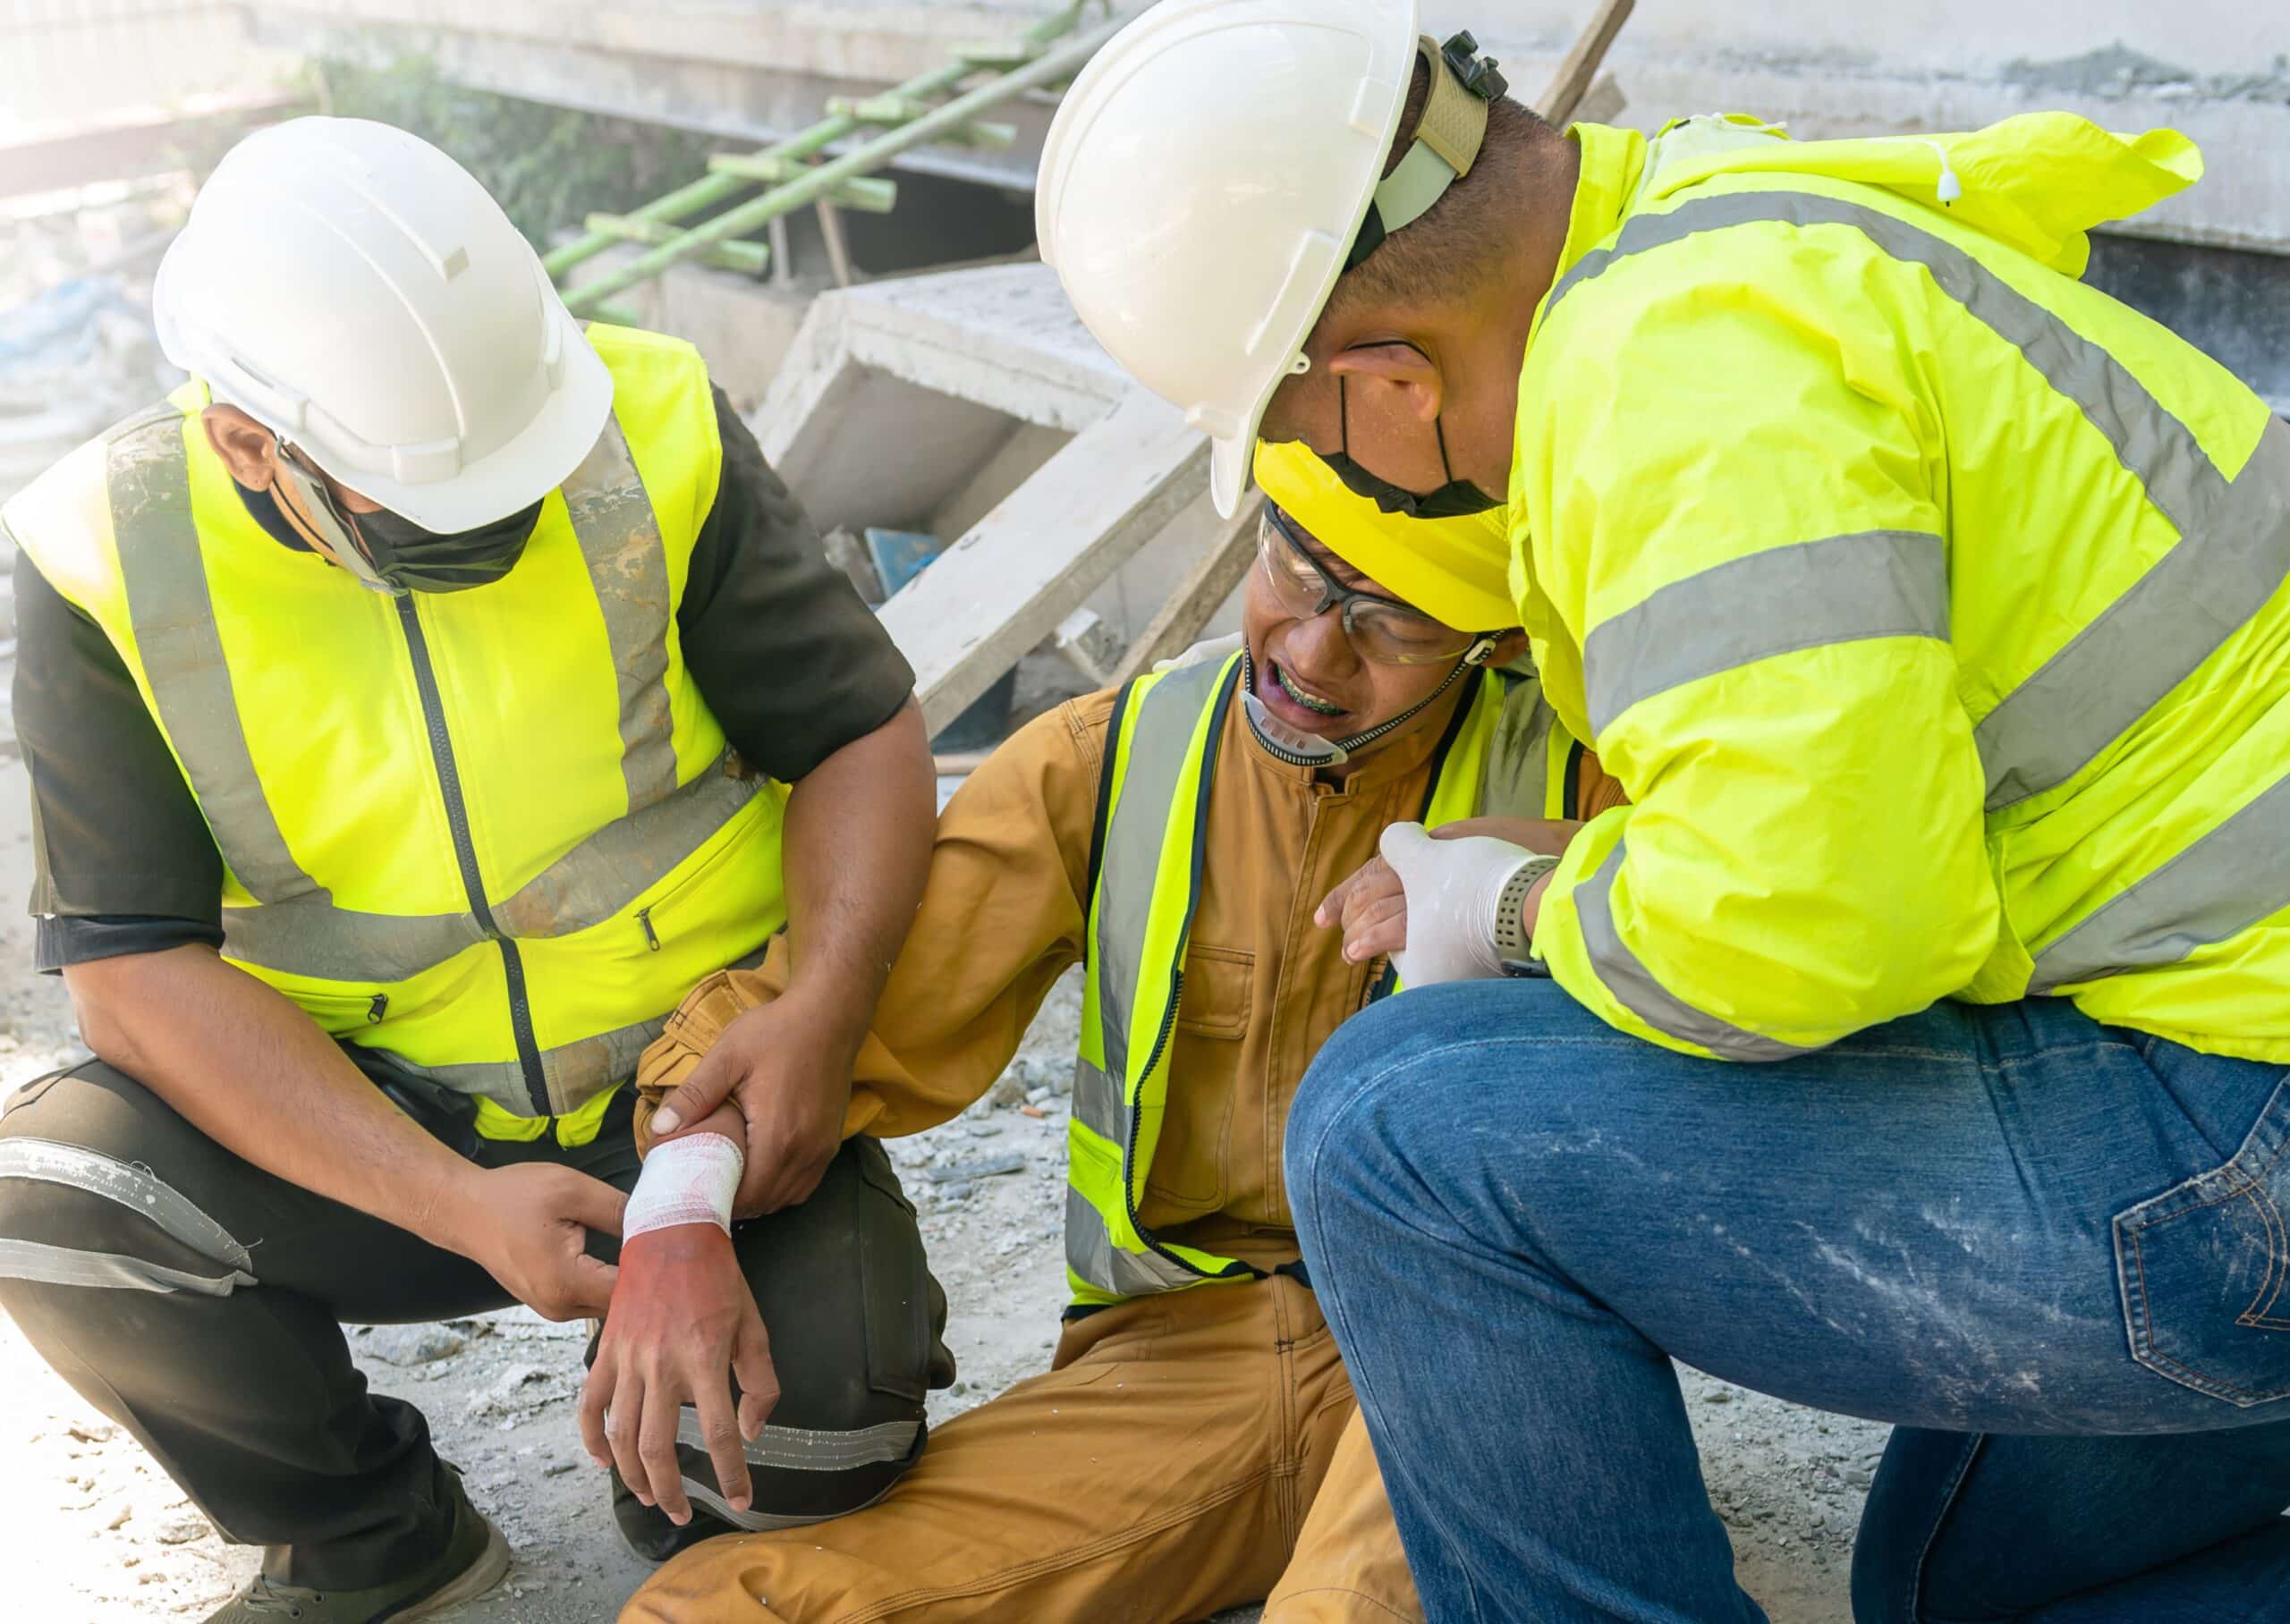 Are You Protected Working in Multiple States? Your Workers’ Compensation May Only be Valid in One State